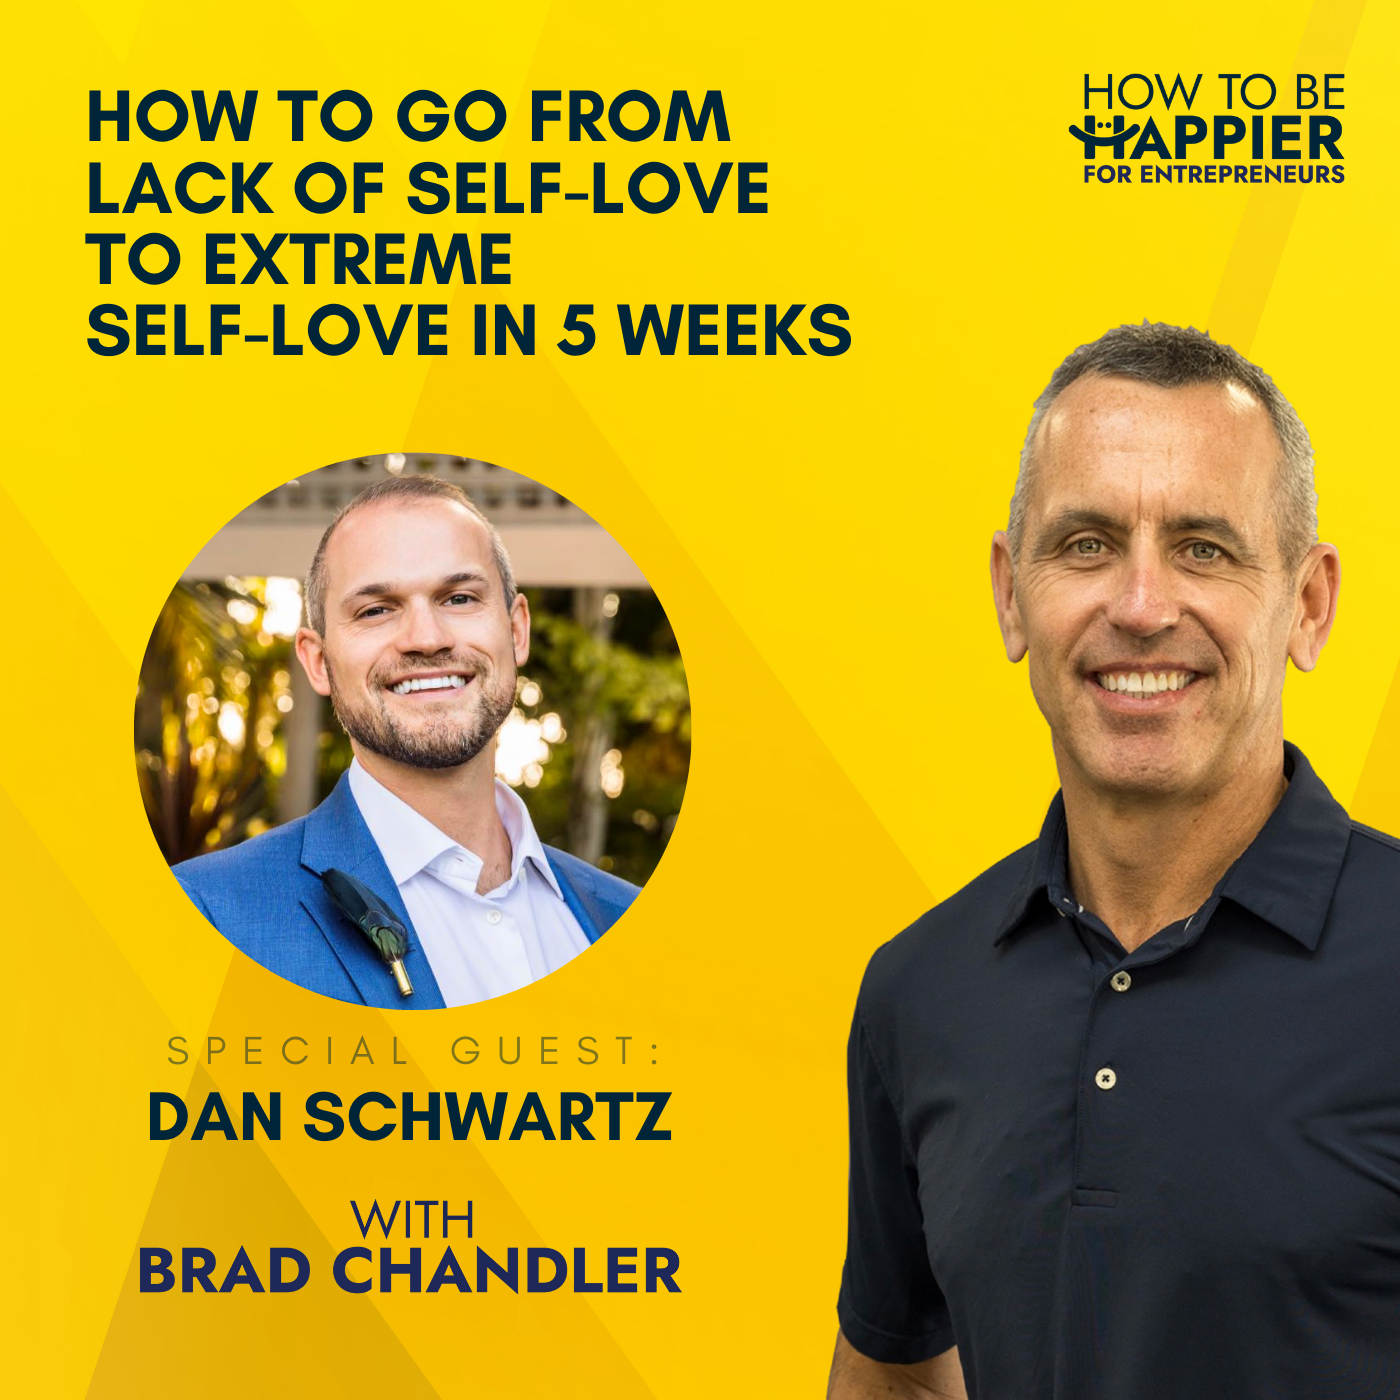 EP24: How to Go From Lack of Self-Love to Extreme Self-Love in 5 Weeks with Dan Schwartz